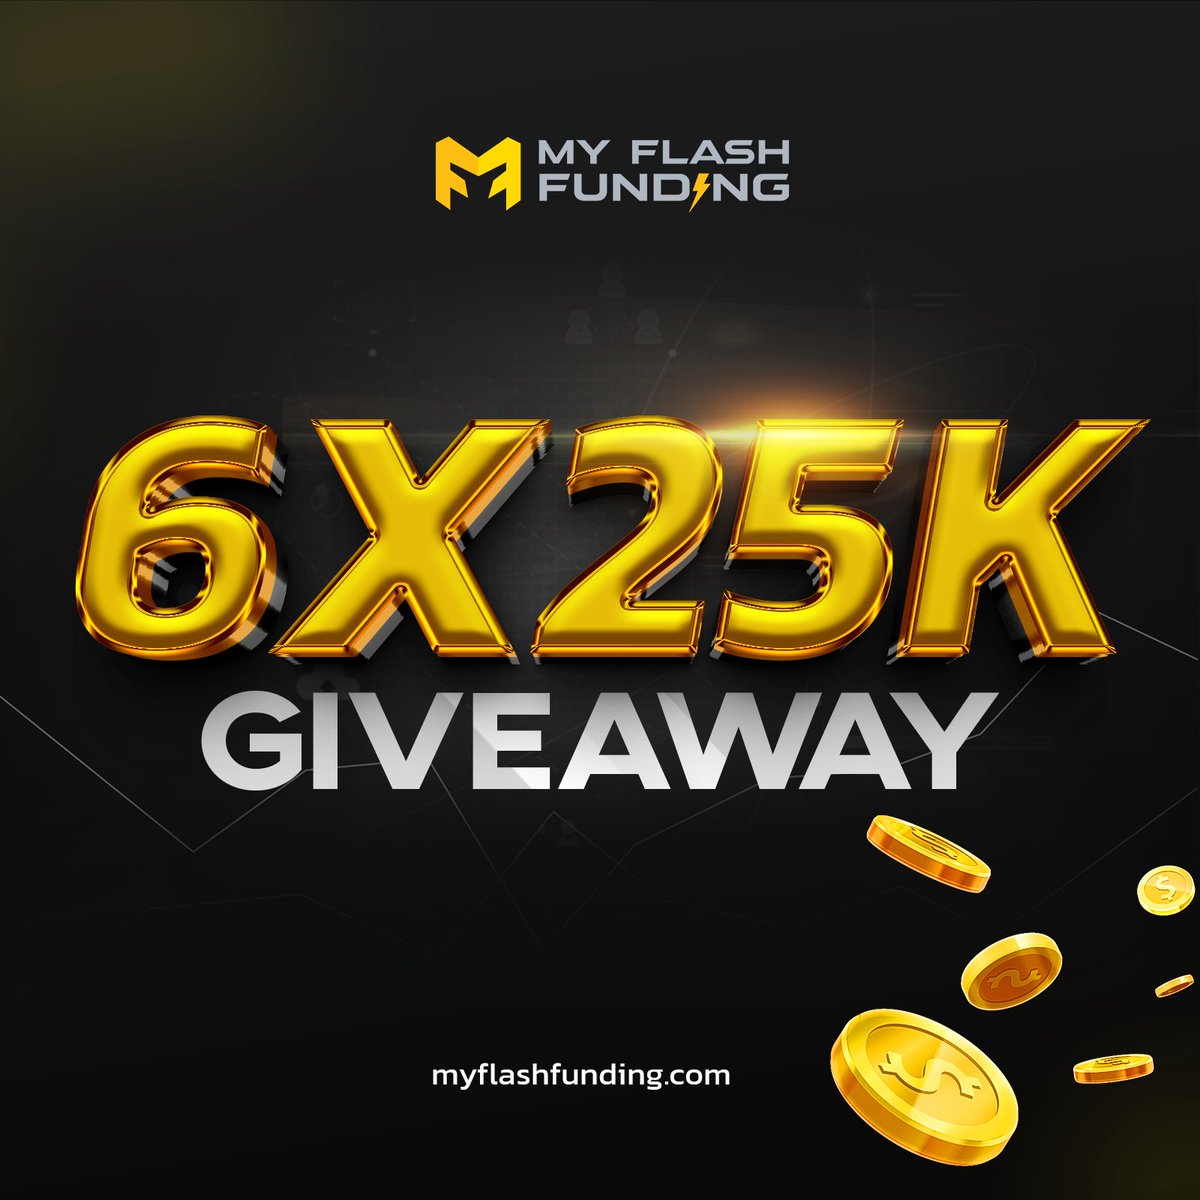 ⚡ 6 x $25K GIVEAWAY ⚡ 1) Follow @myflashfunding & turn notifications ON 🔔 2) Like & retweet & tag 4 traders 3) Engage with the quoted Tweet! ⚡ 72h ⚡